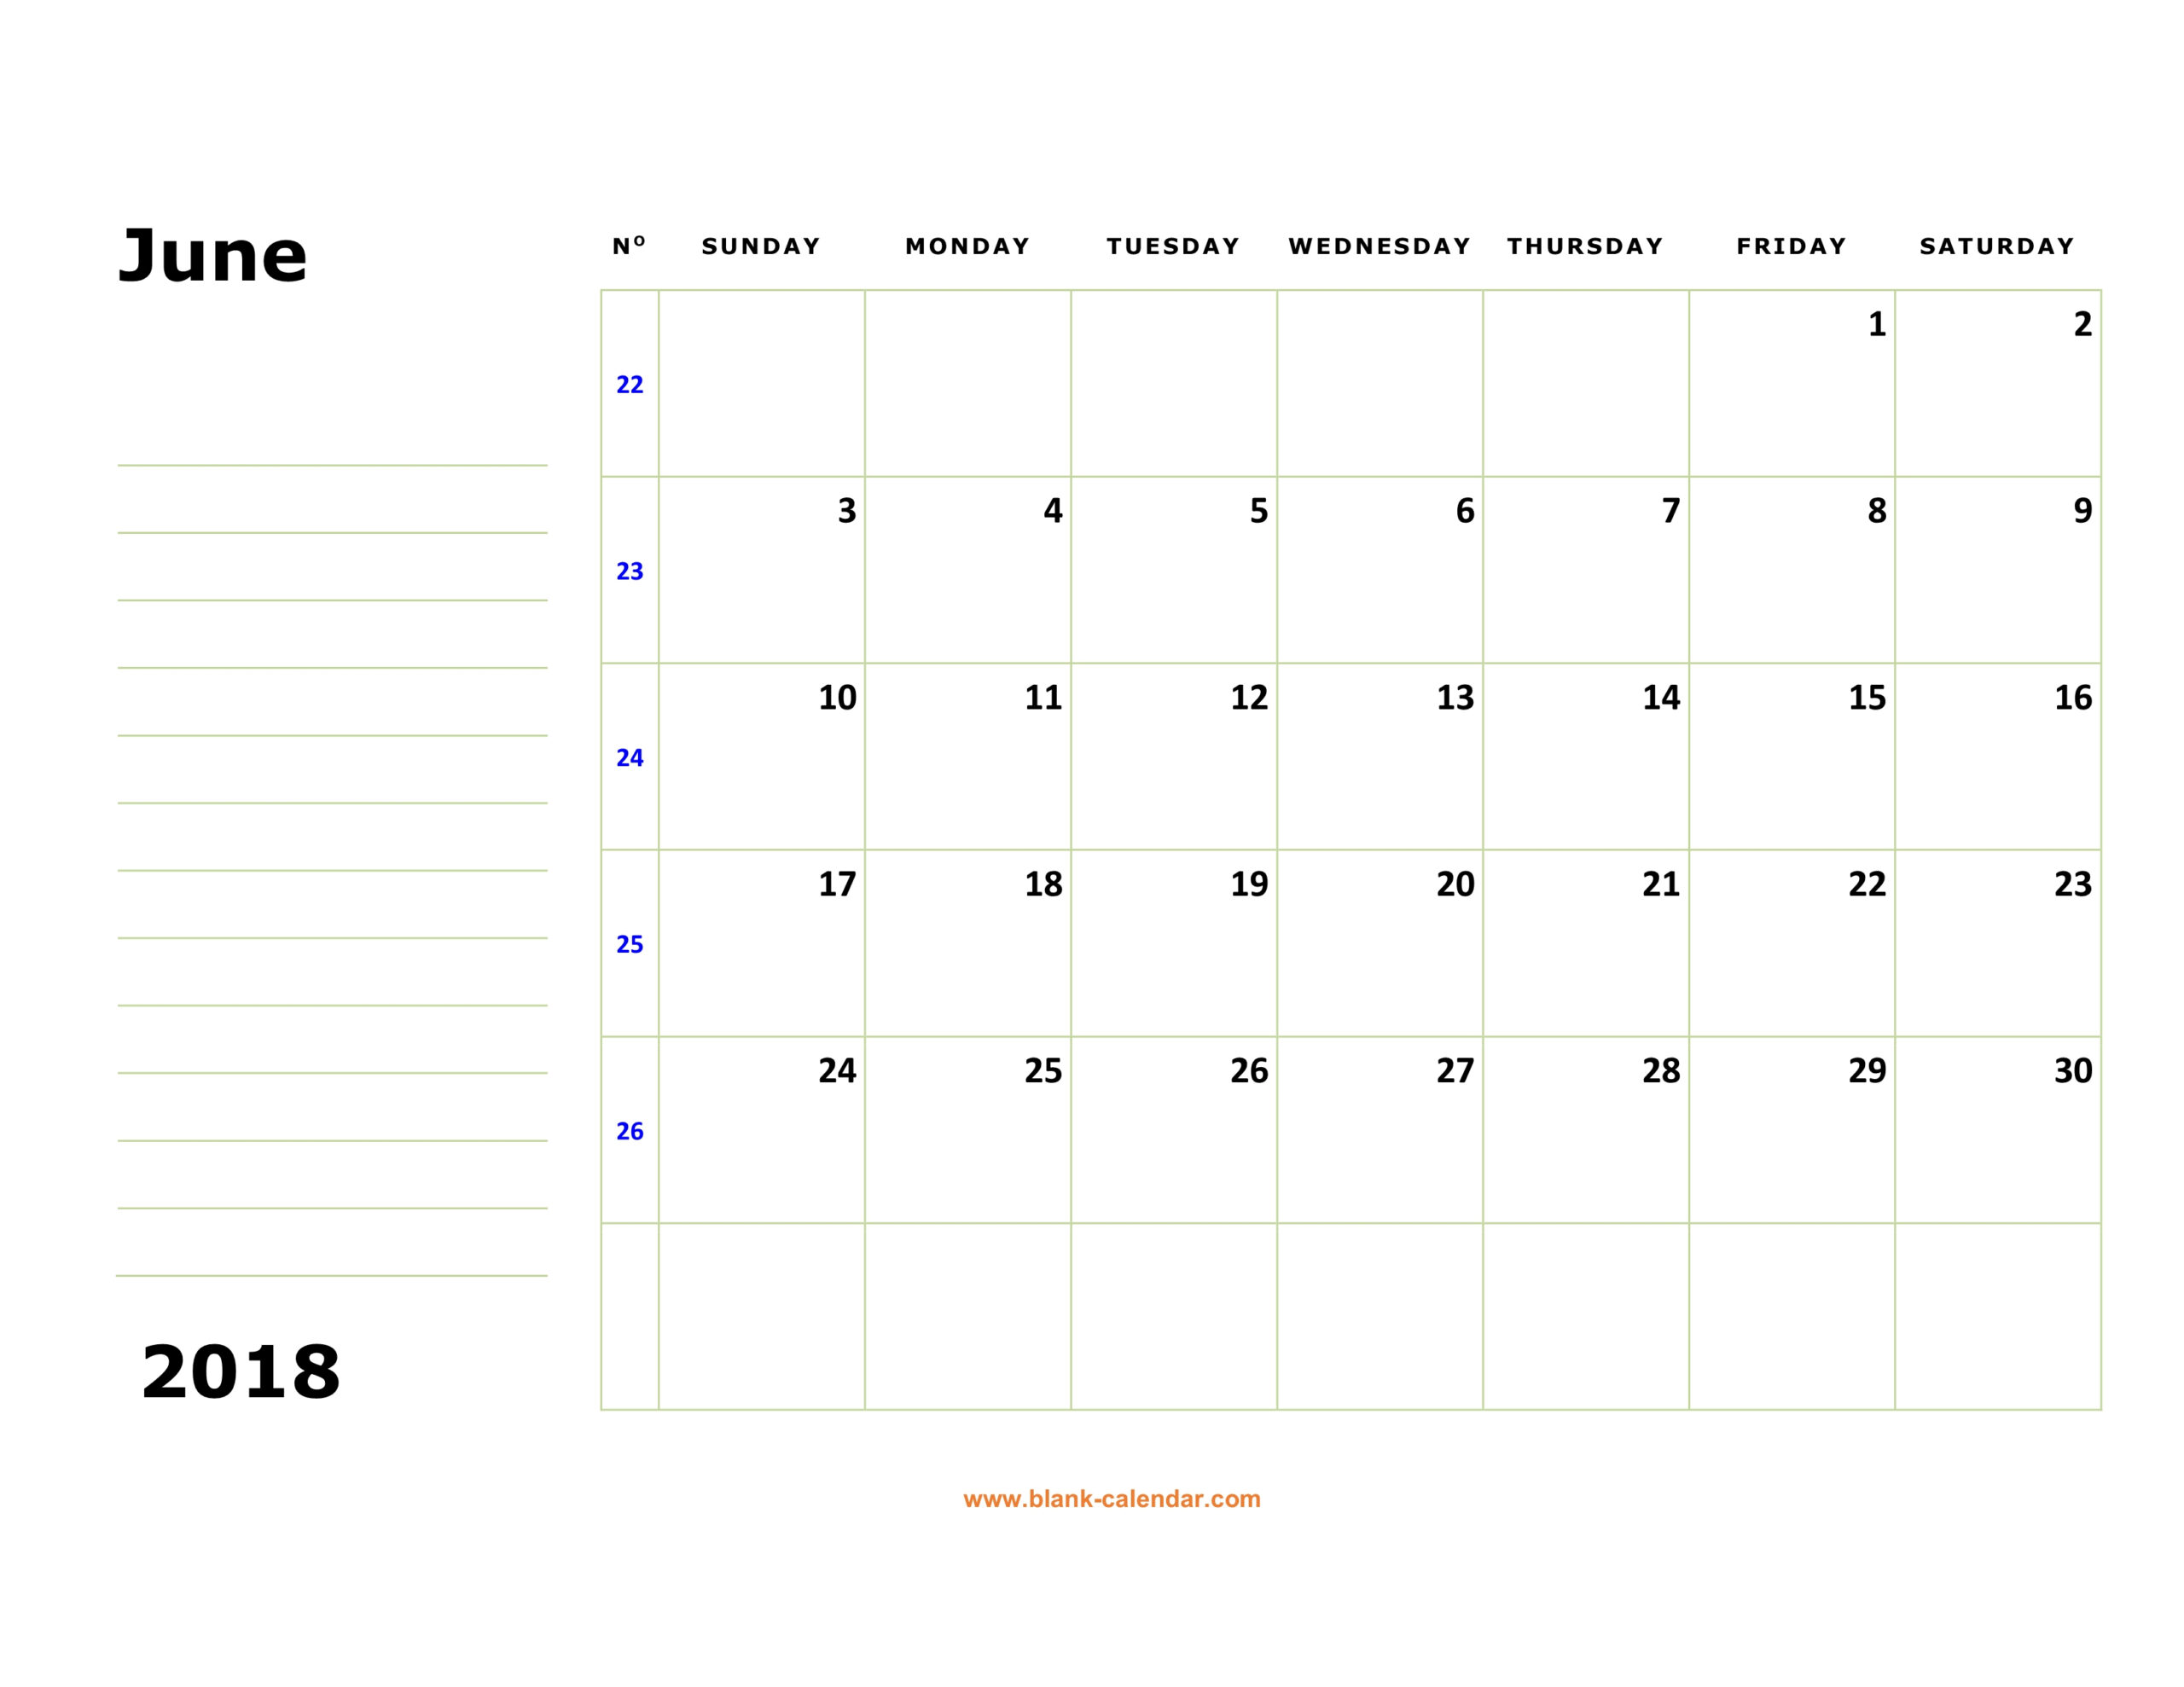 Printable Calendar Large Squares | Example Calendar Printable pertaining to Large Square Calender Template